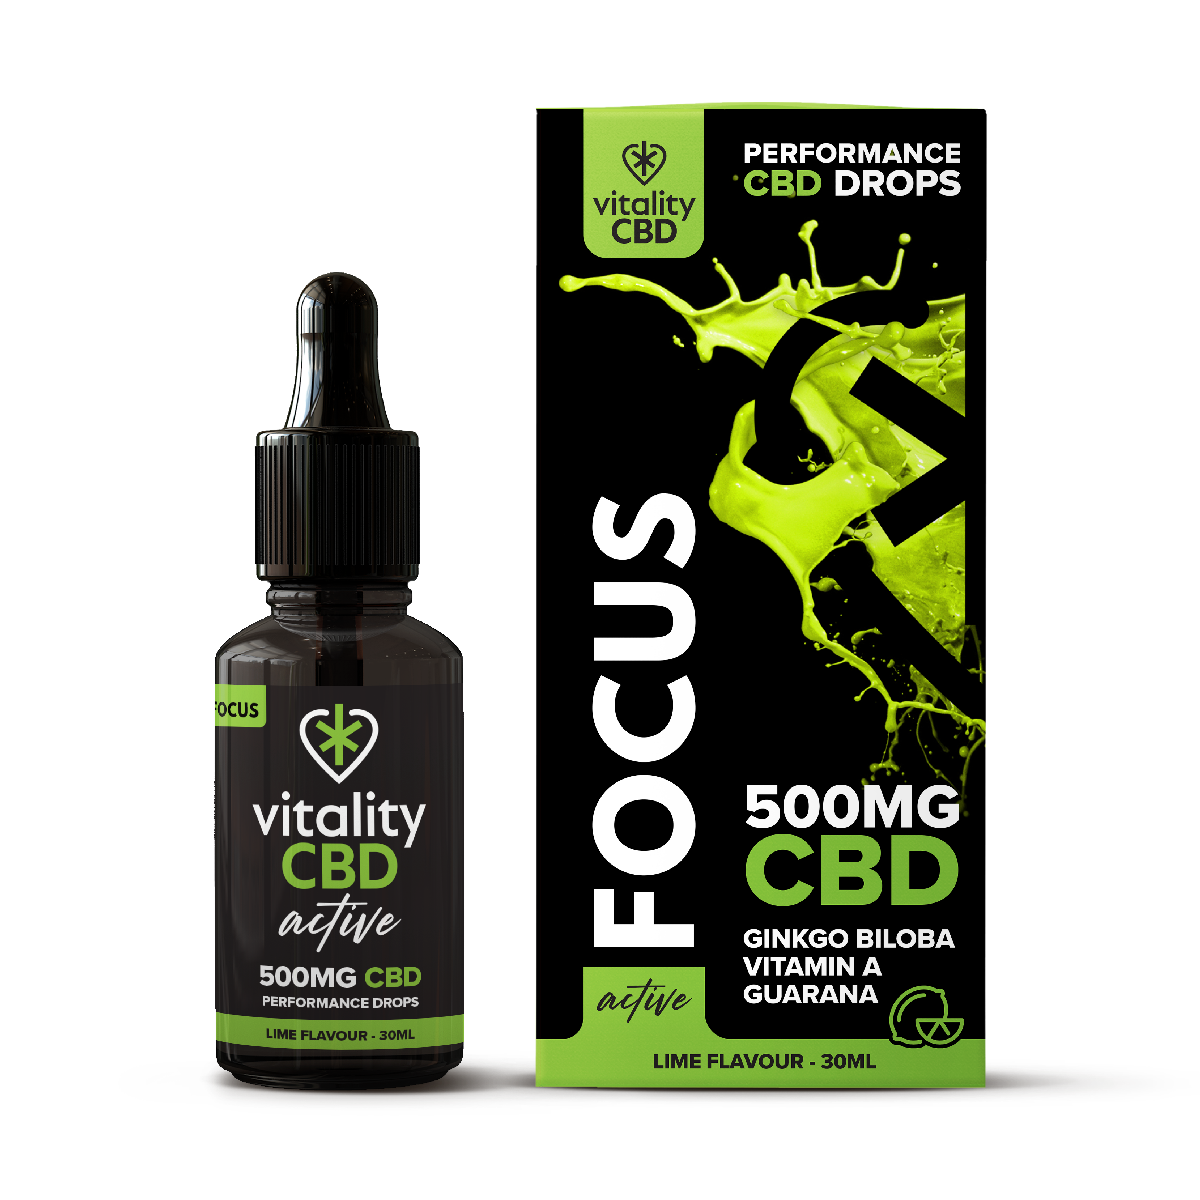 CBD Oil Drops For Fitness Performance 500mg